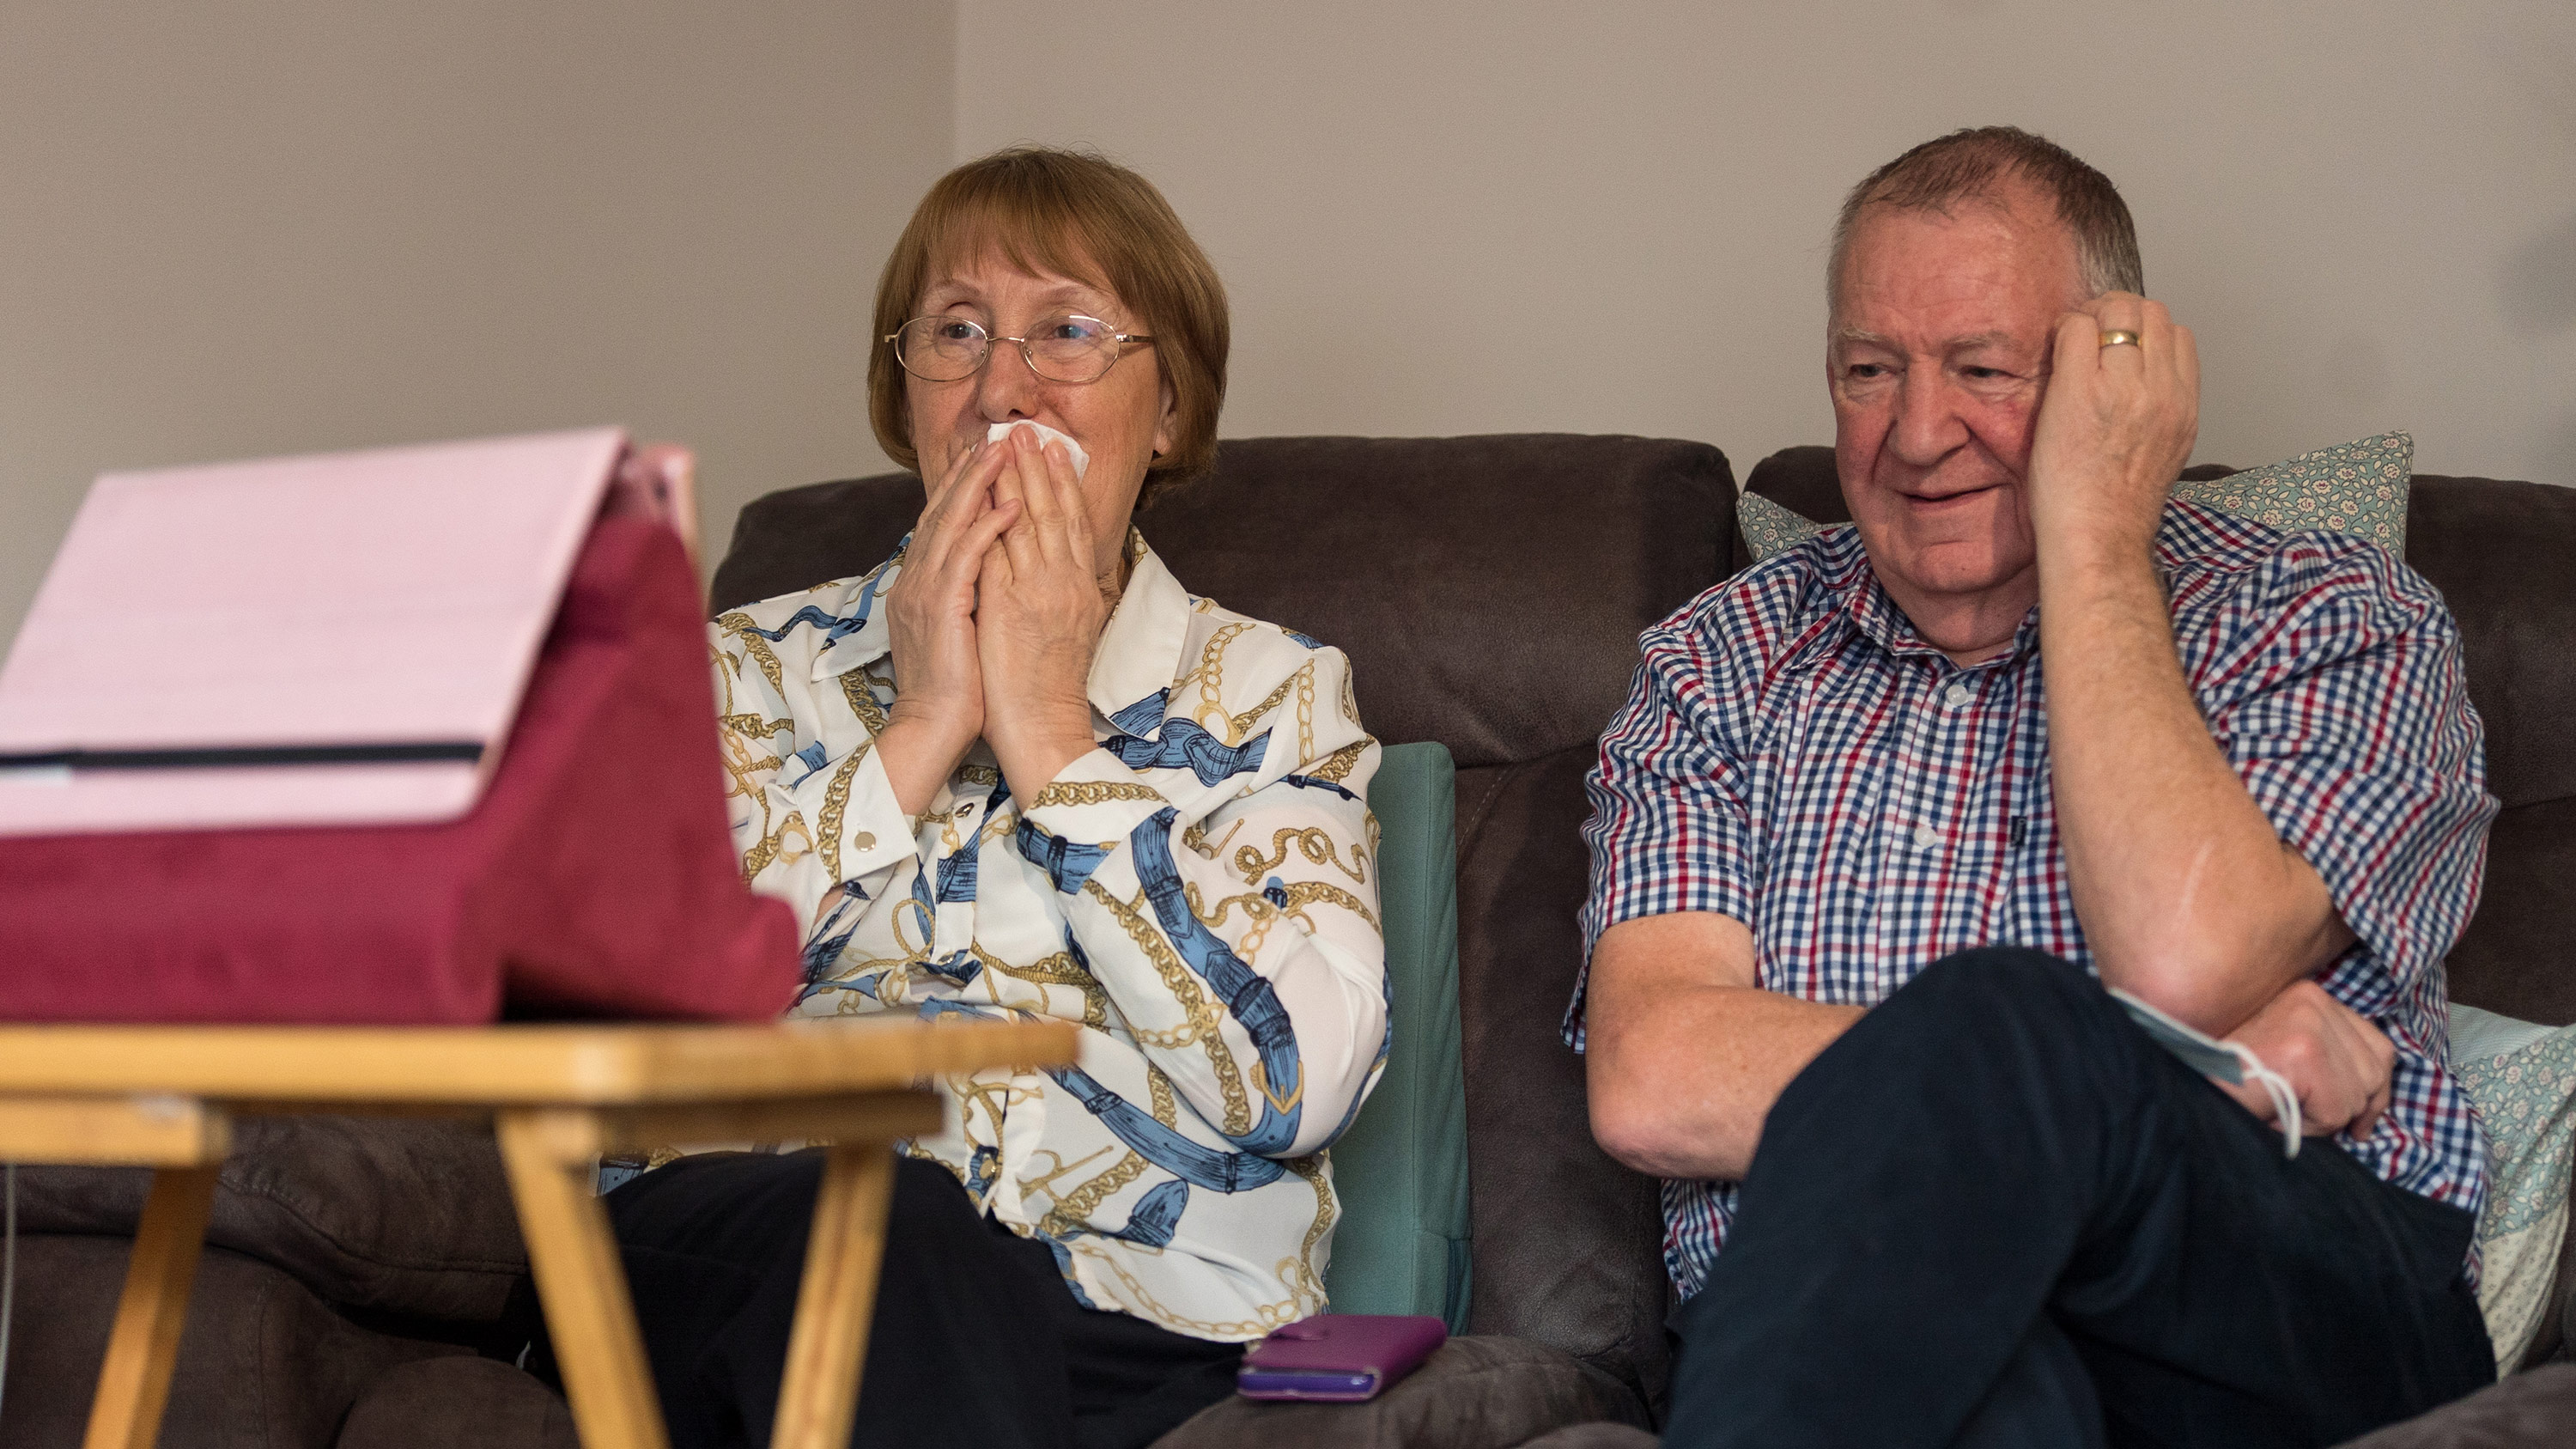 Trish Skinner sits with her husband Peter at home in Northamptonshire as they watch her father's burial service over Zoom.